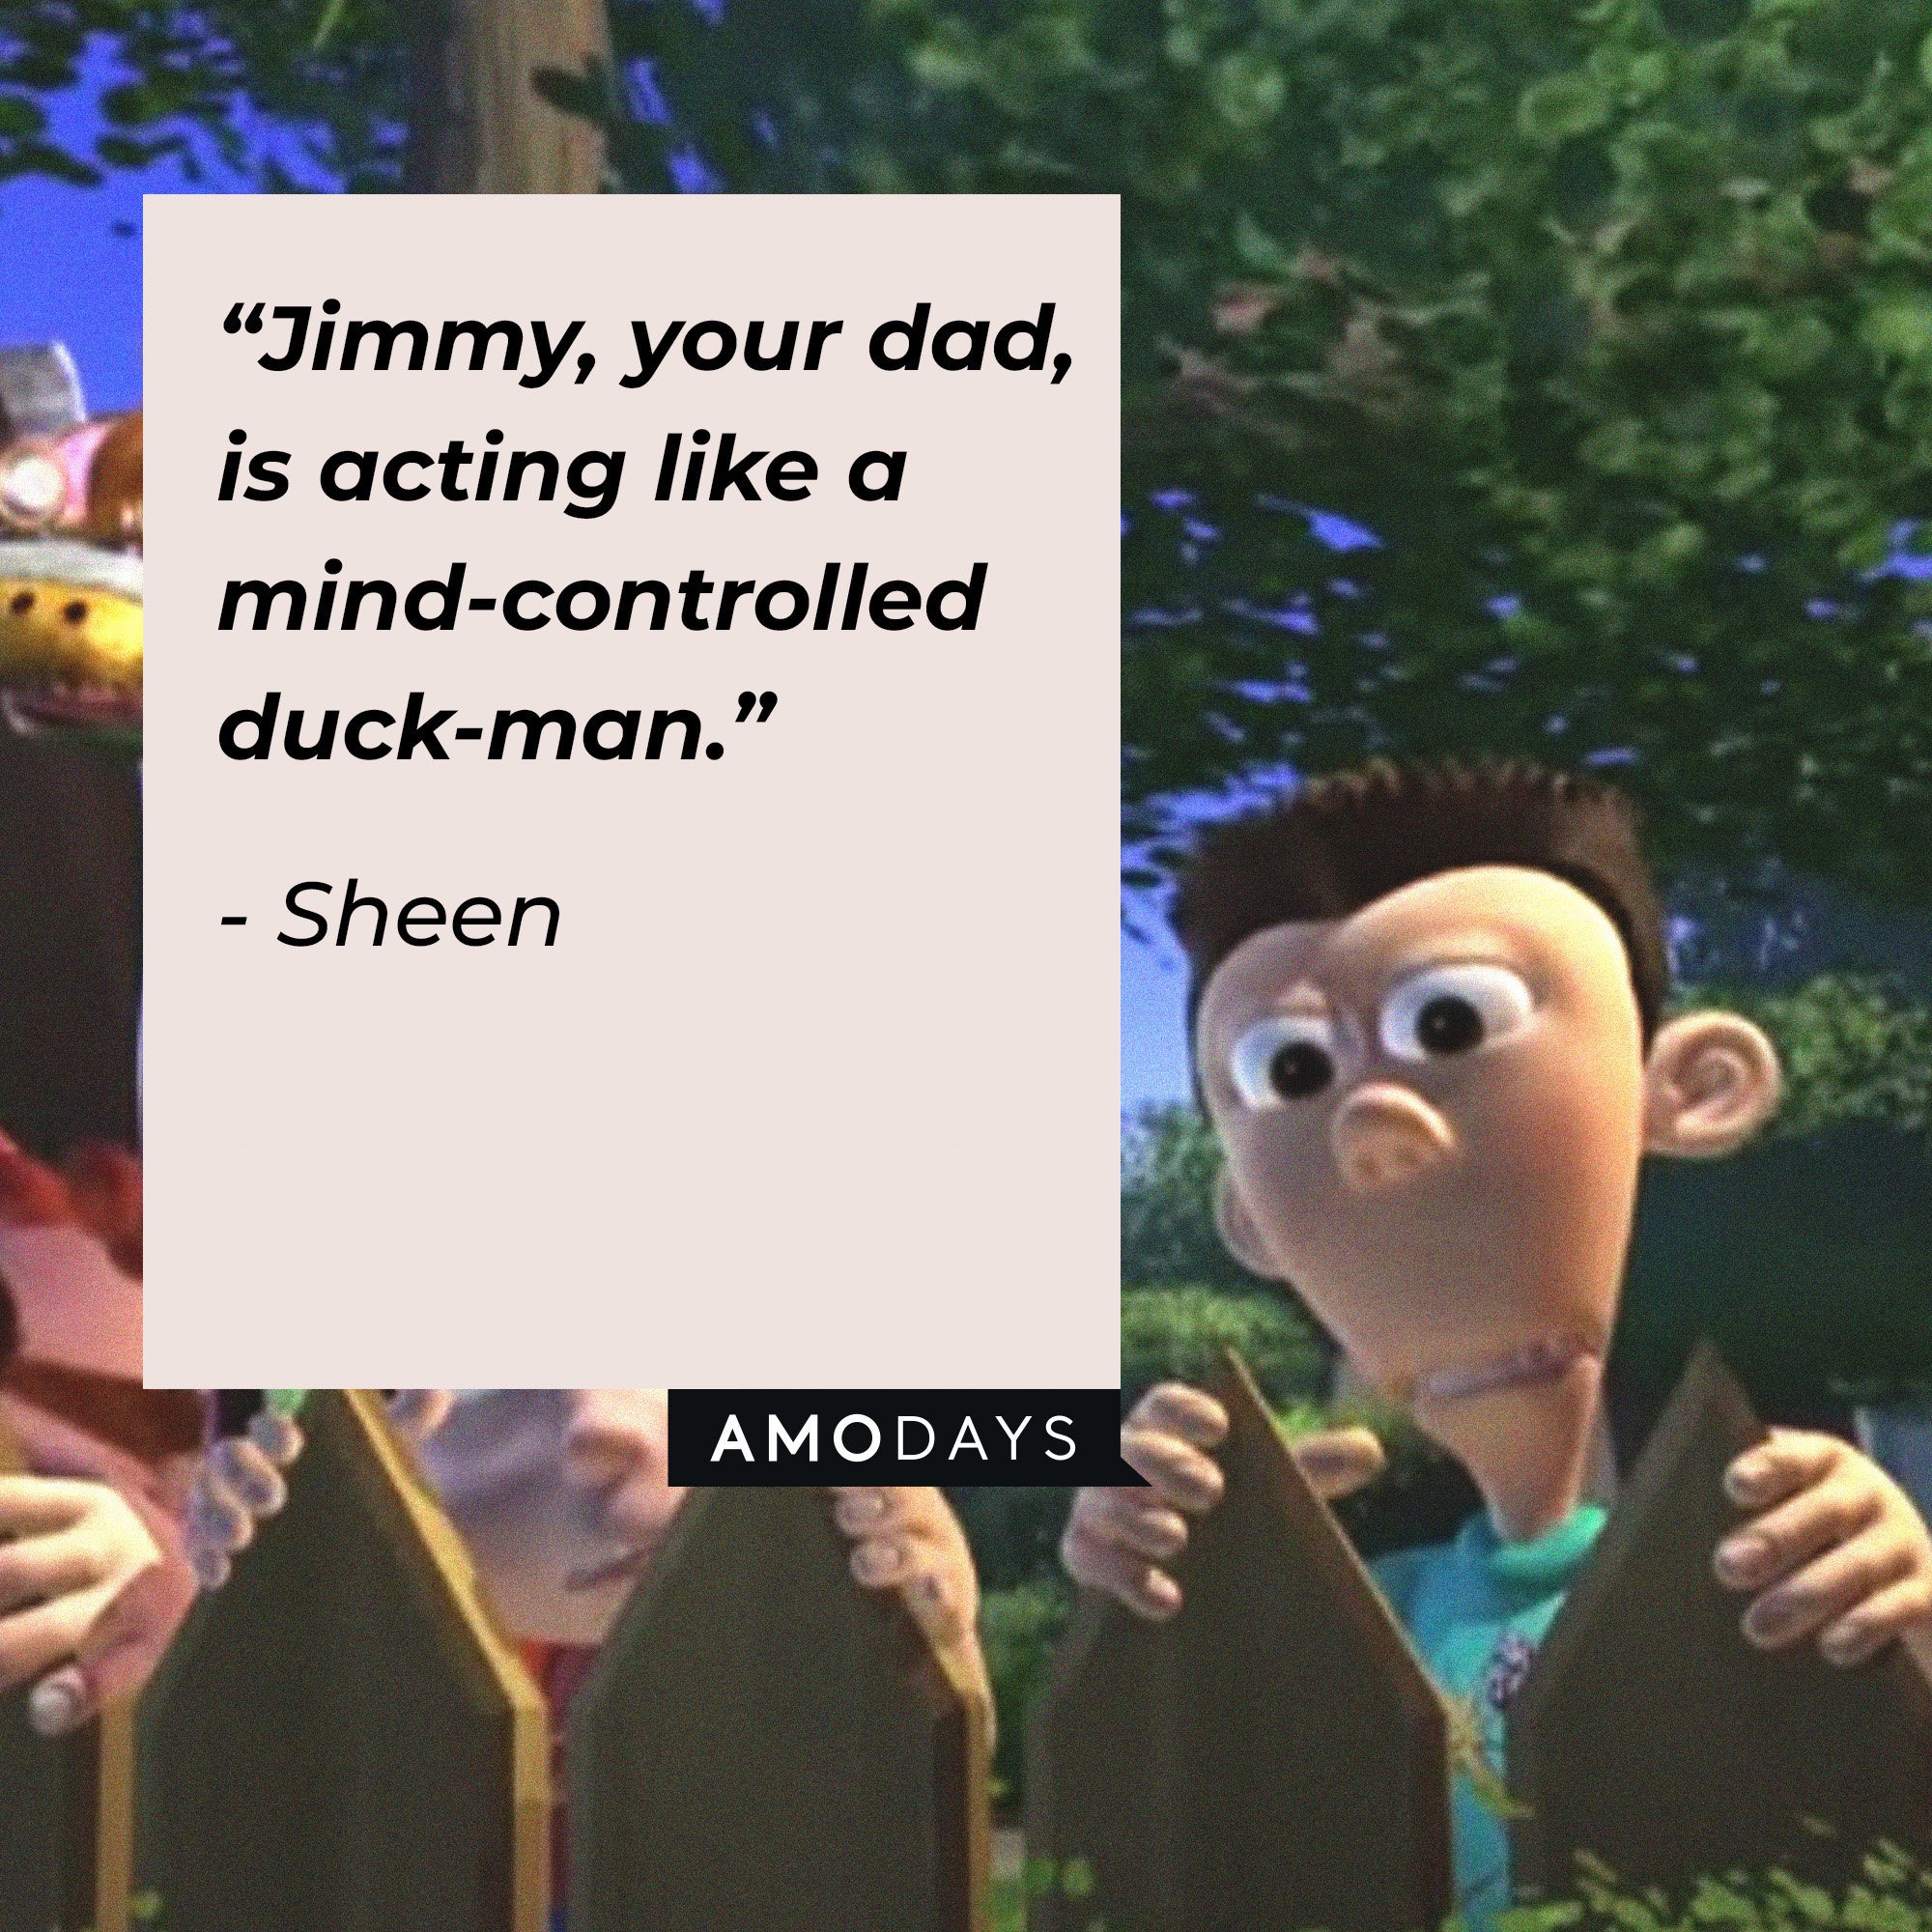 Sheen’s quote: “Jimmy, your dad, is acting like a mind-controlled duck-man.”  | Image: AmoDays